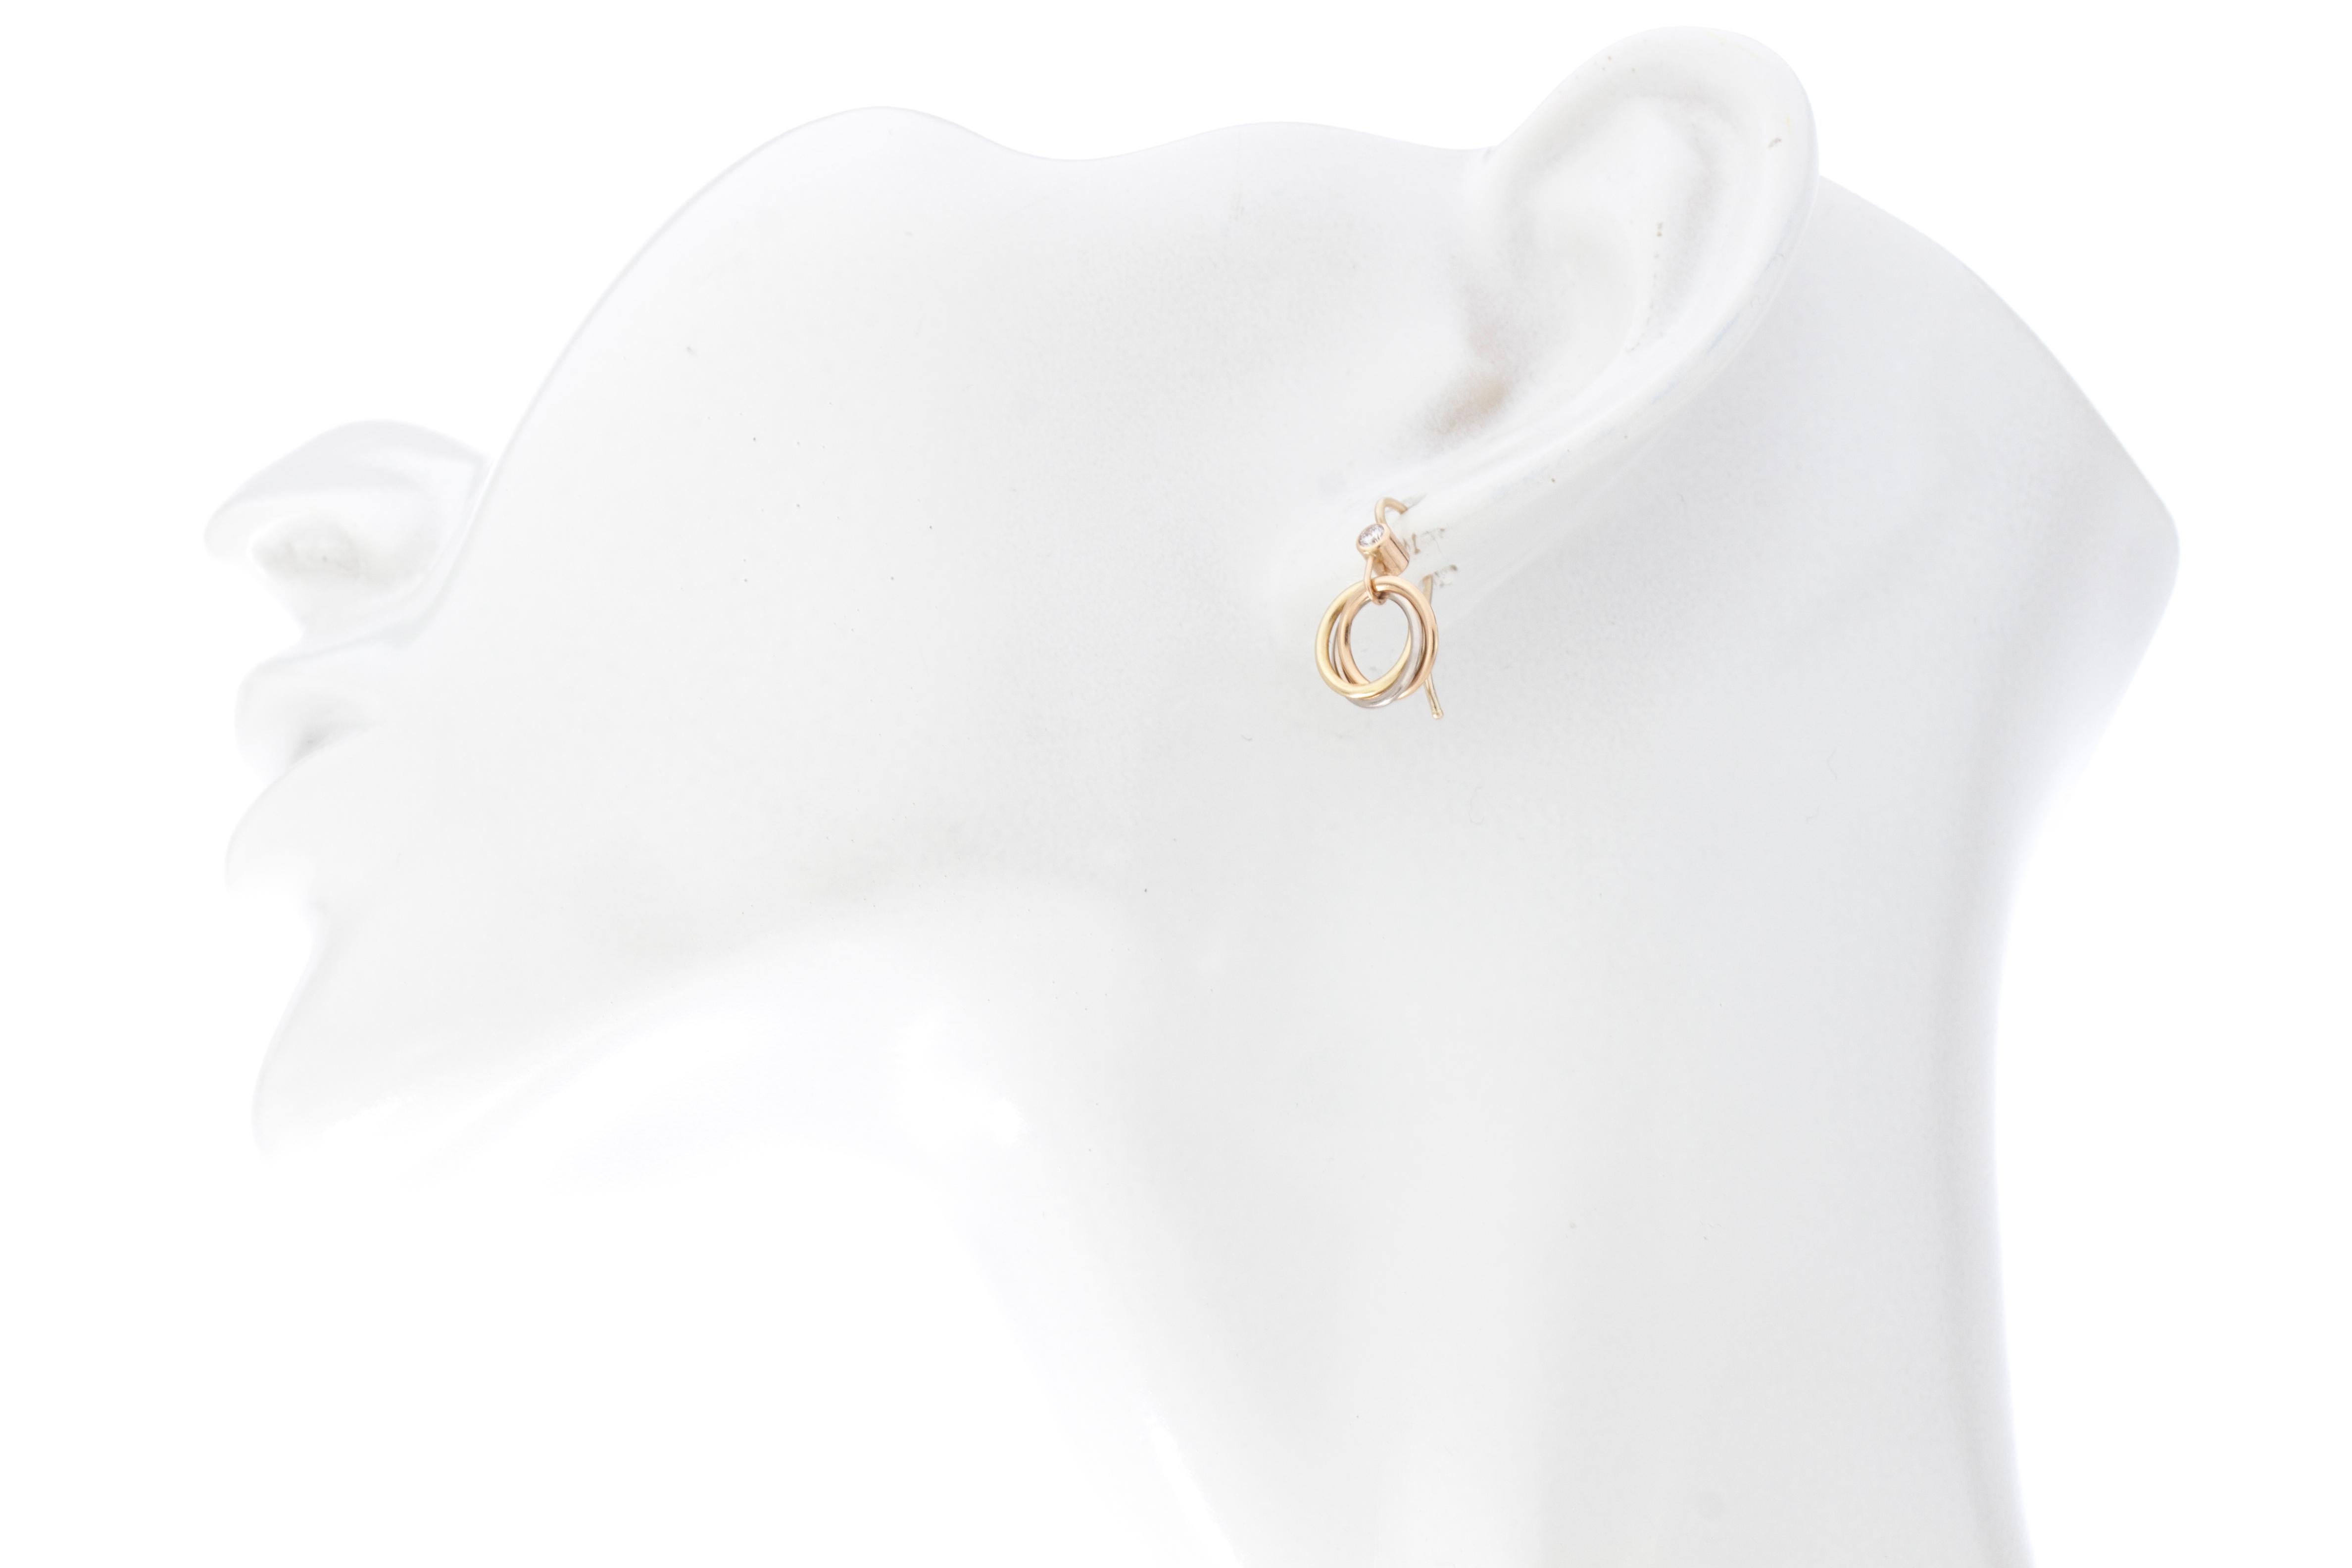 Cartier trinity 18kt white yellow and rose gold ladies earrings with diamond
Designer: Cartier
Made in France, Paris circa 1990's
Fully hallmarked.

Dimension - 
Size : 2 x 1.2
Weight : 3 grams

Diamond - 
Cut : Round
Quantity of stones : 2
Sizes :